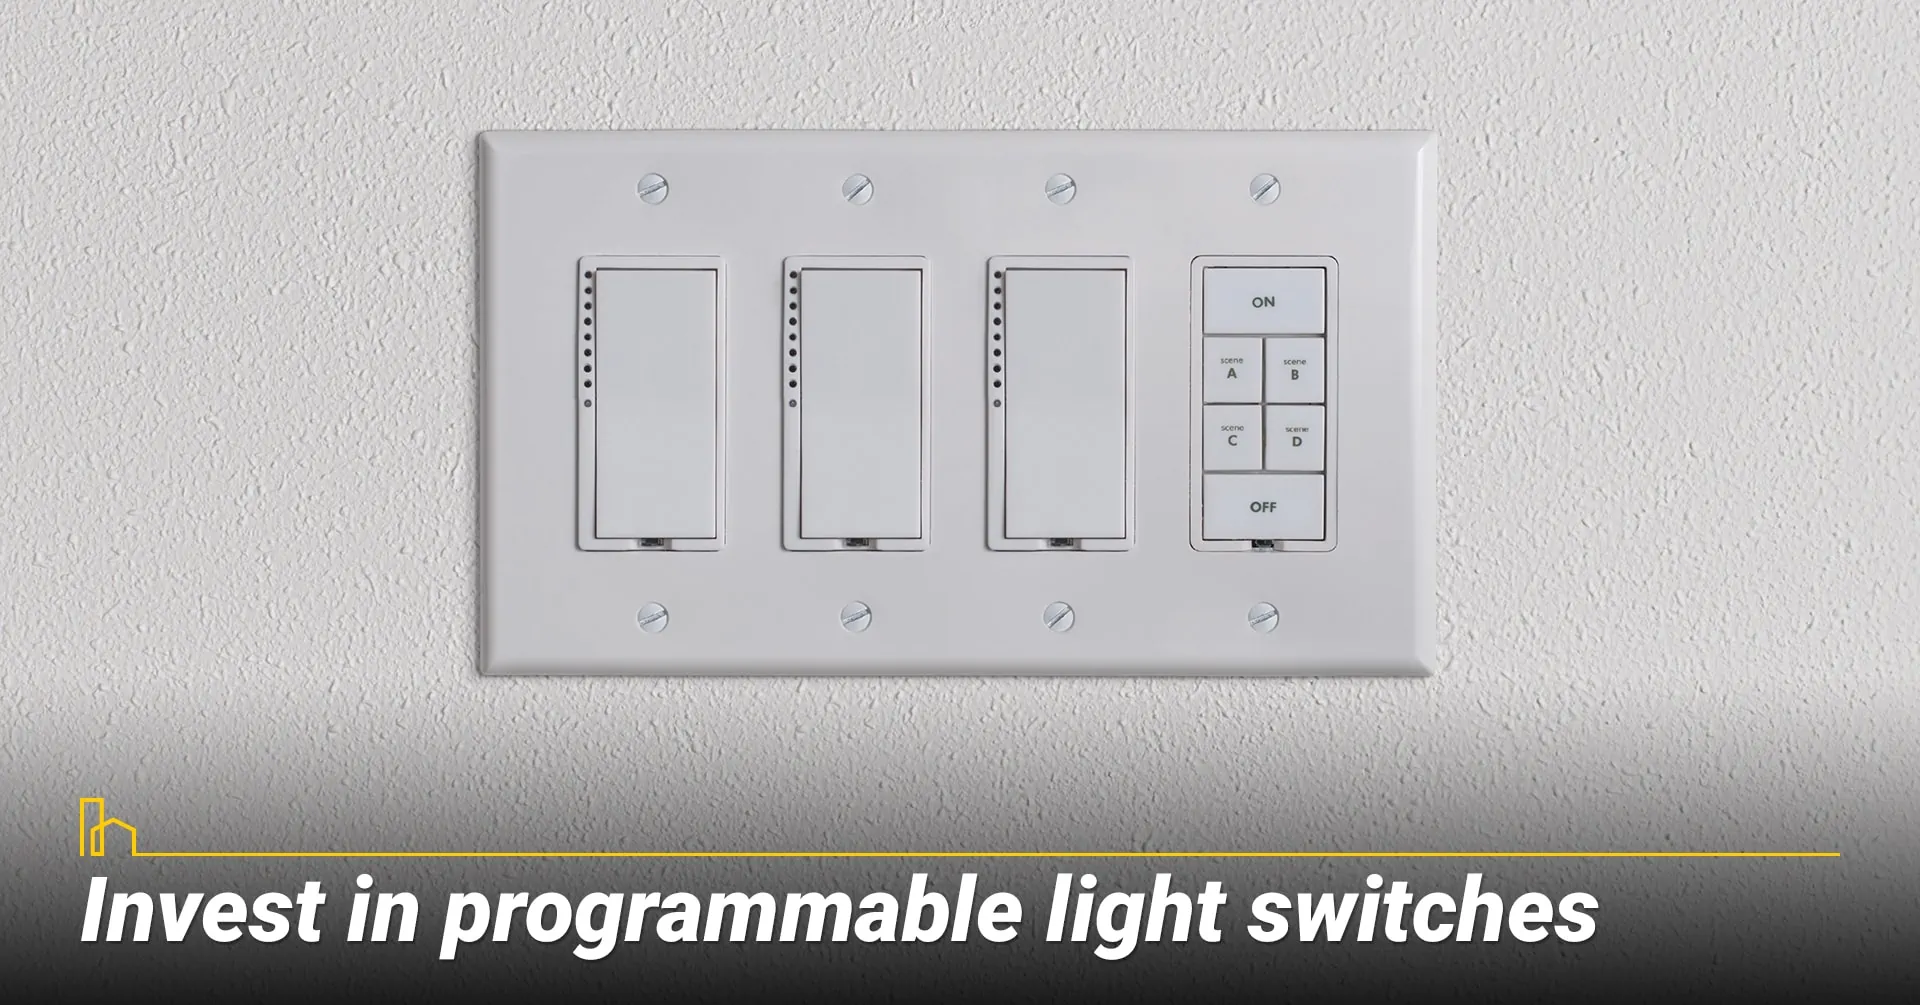 Invest in programmable light switches.